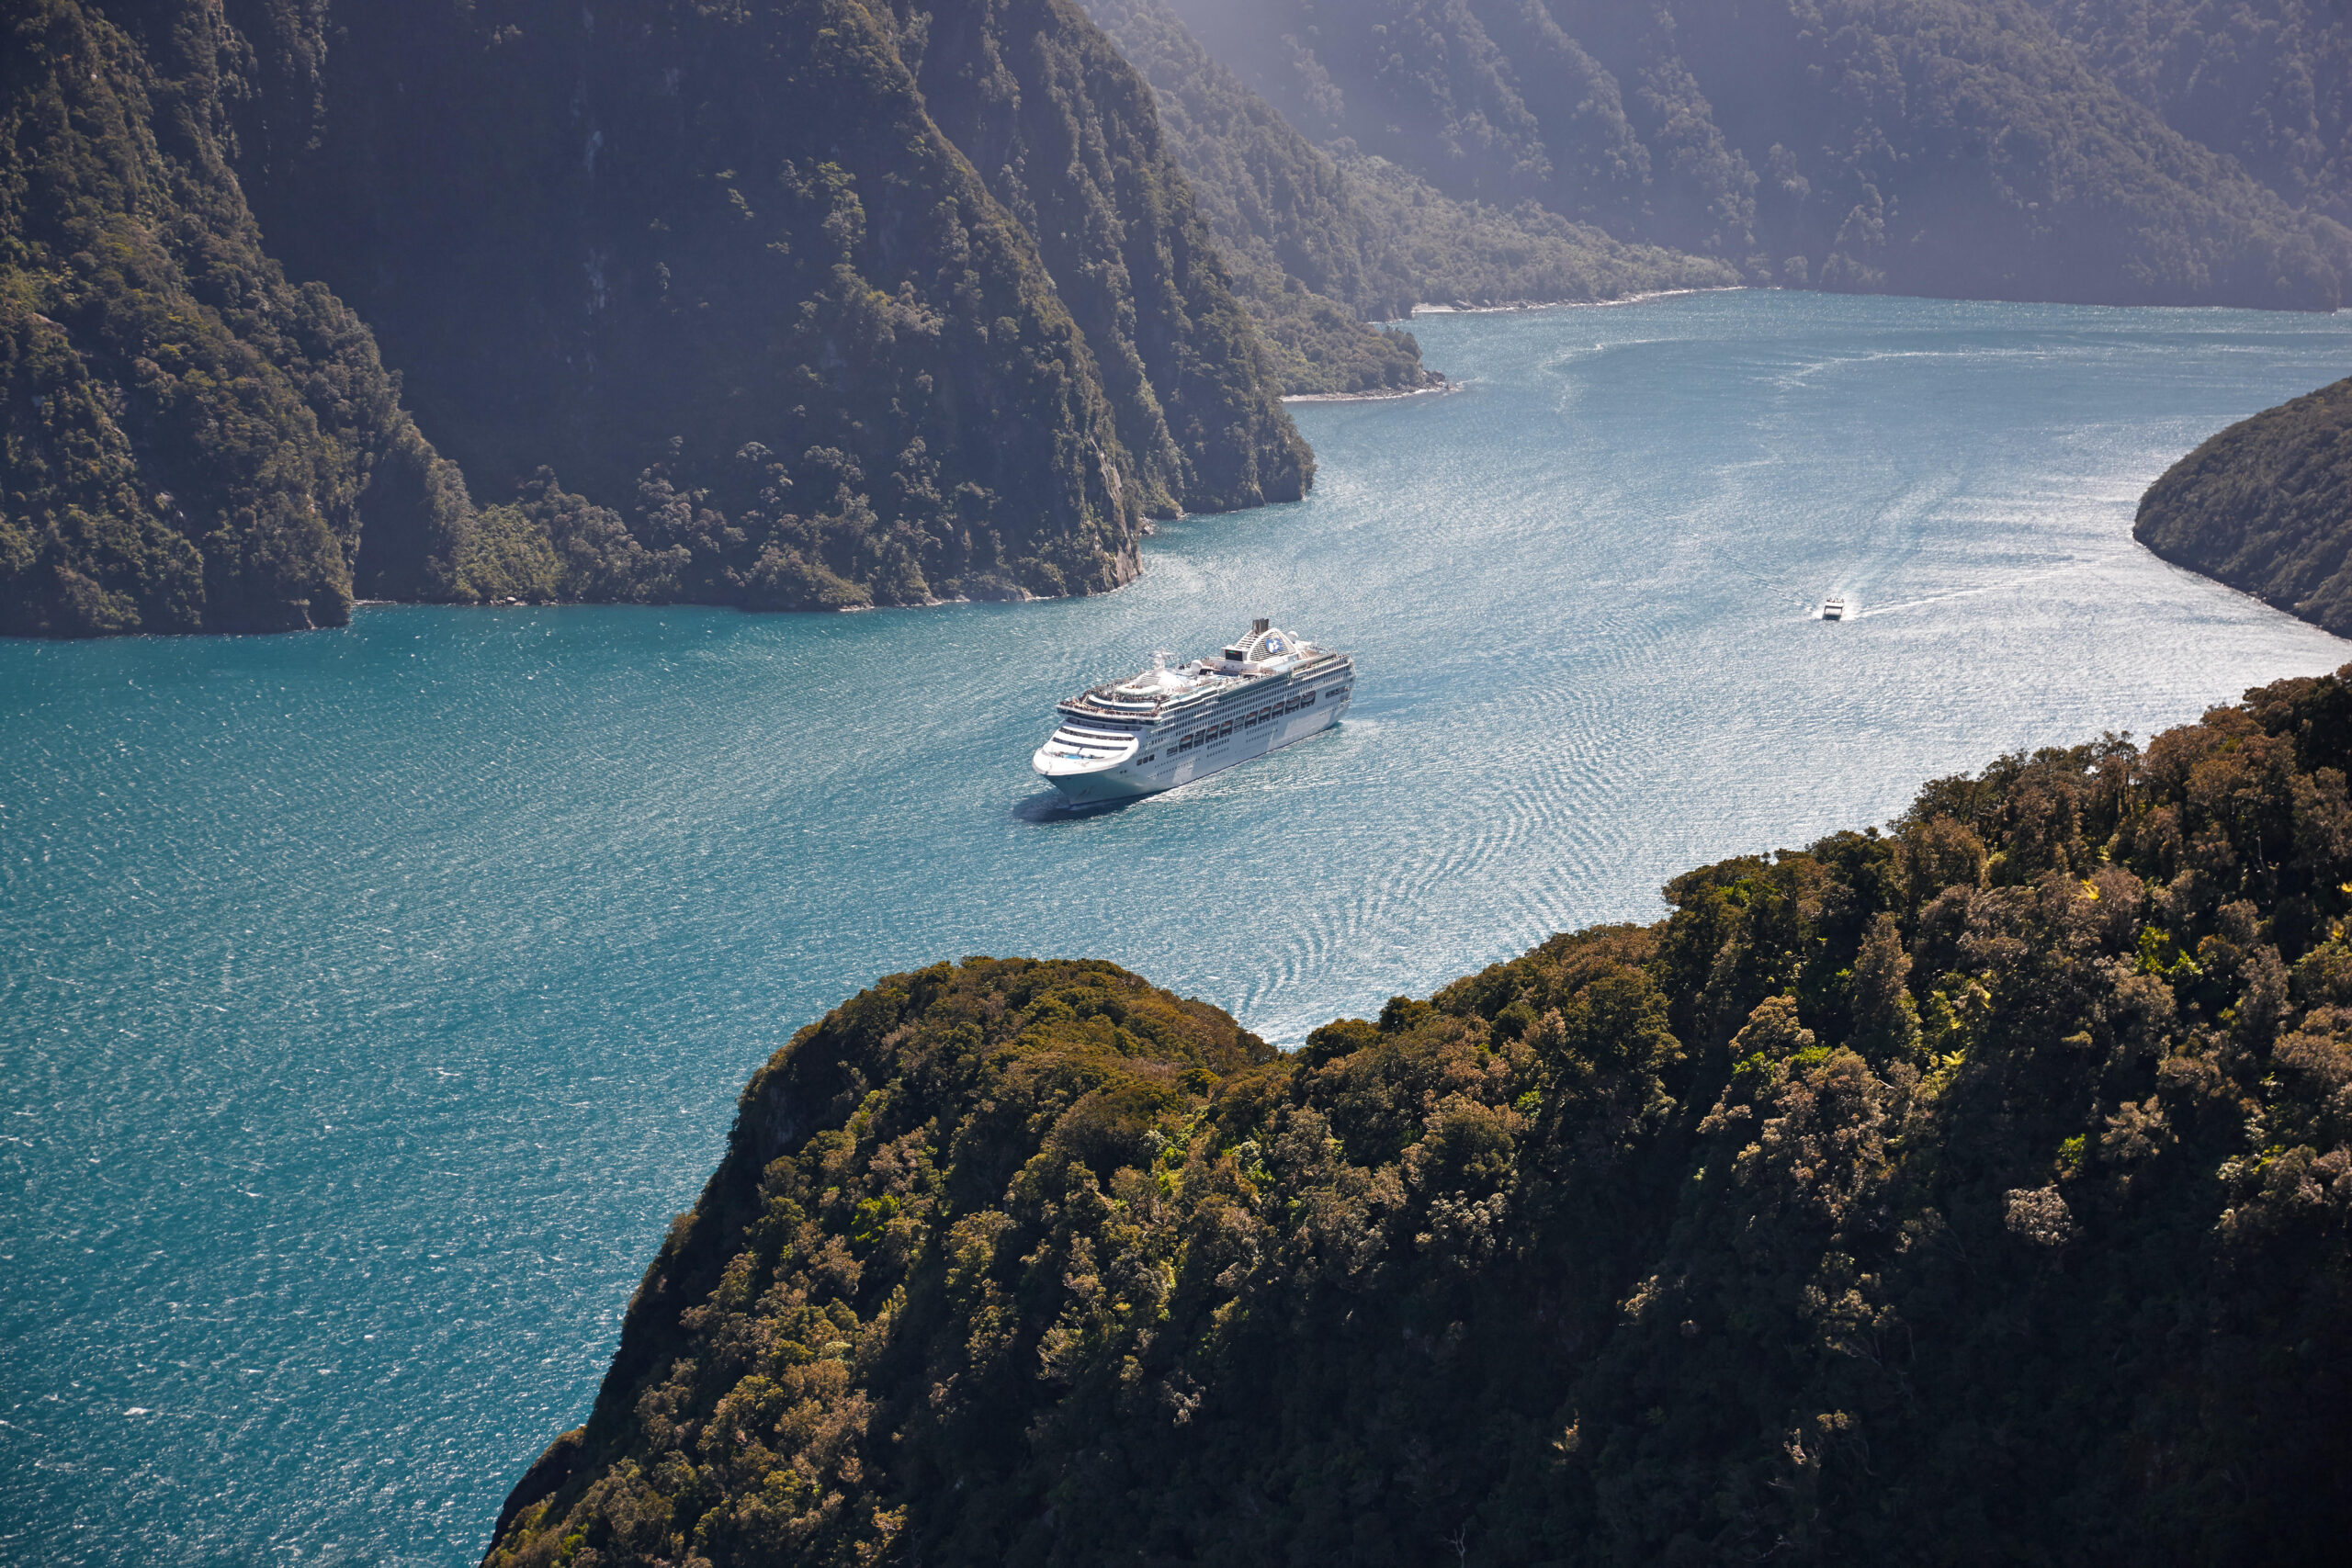 Sea Princess cruising in New Zealand fjords on the water